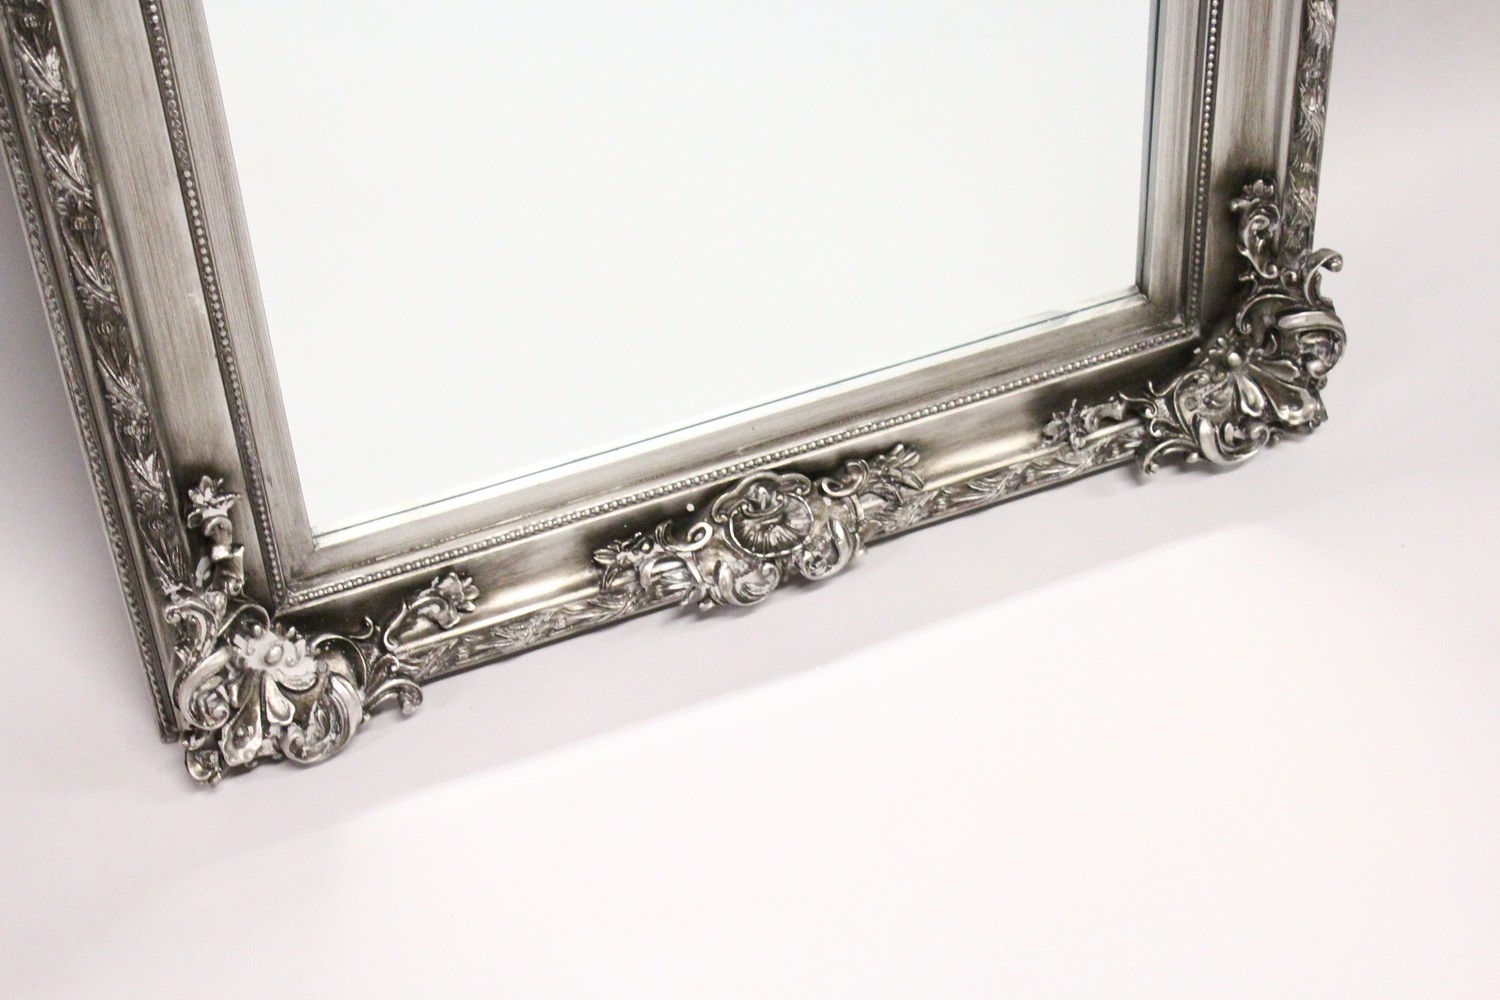 A LARGE WALL MIRROR, with moulded silver coloured frame. 5ft 7ins x 2ft 9ins. - Image 3 of 3